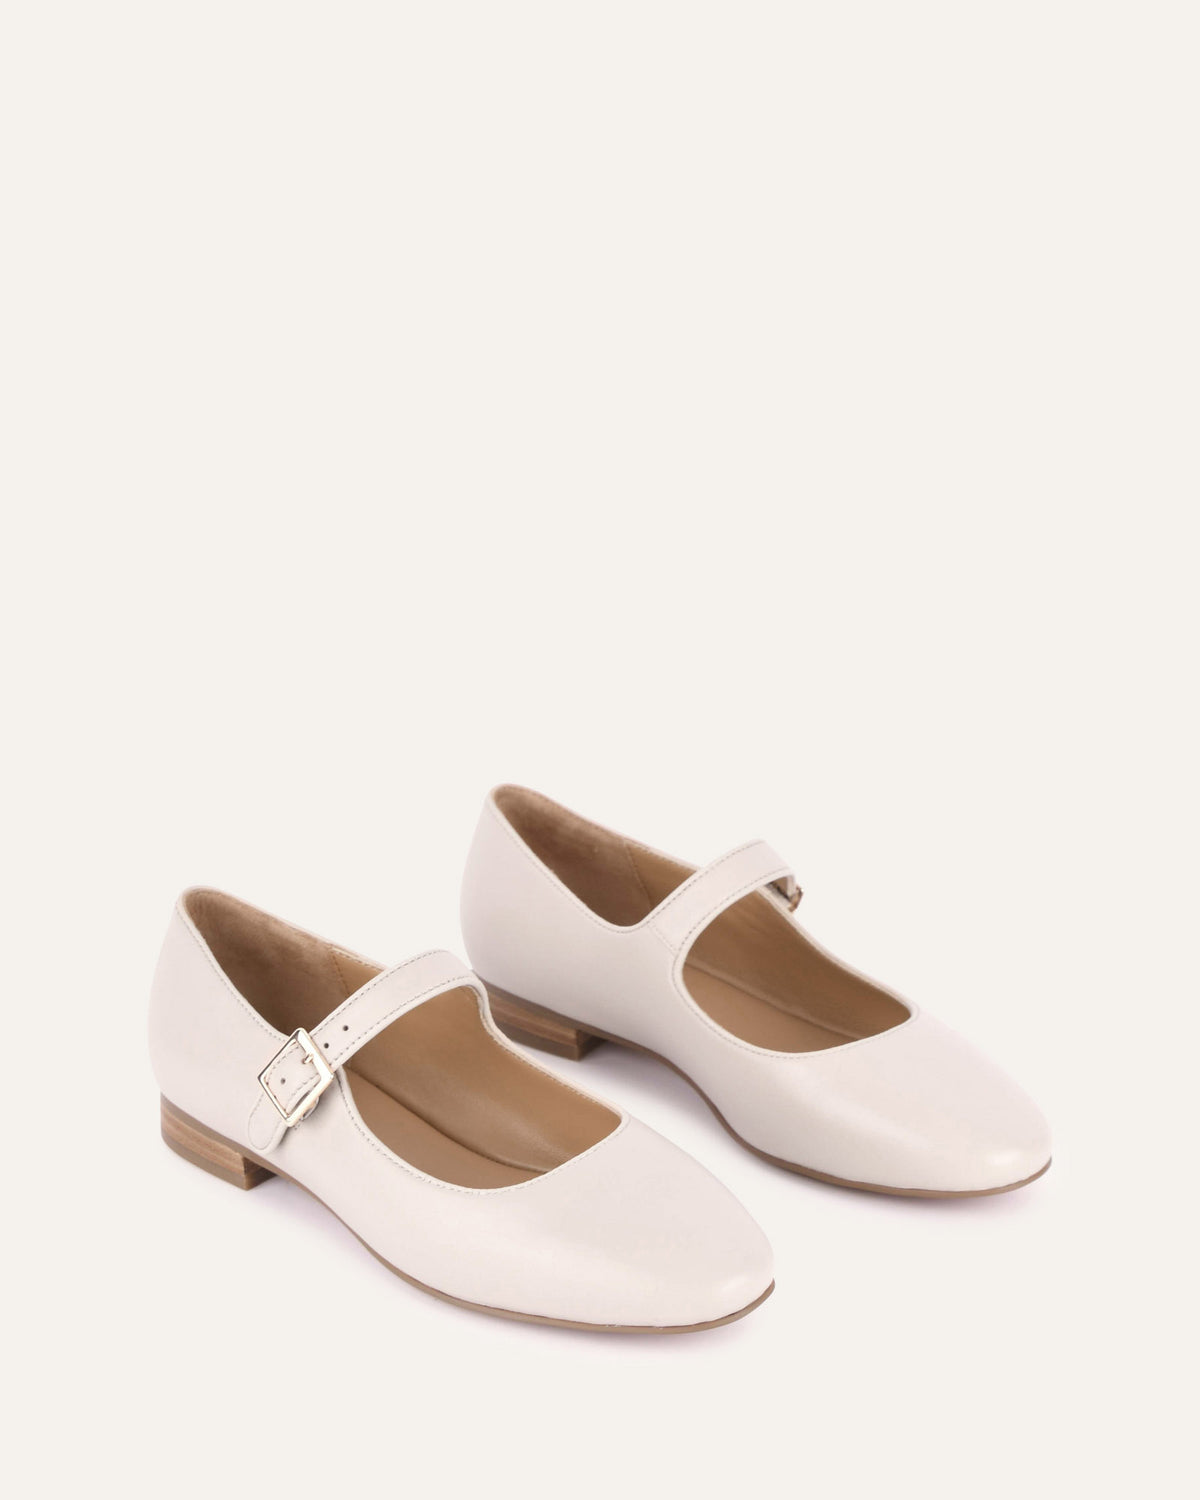 DARCY CASUAL FLATS BONE LEATHER